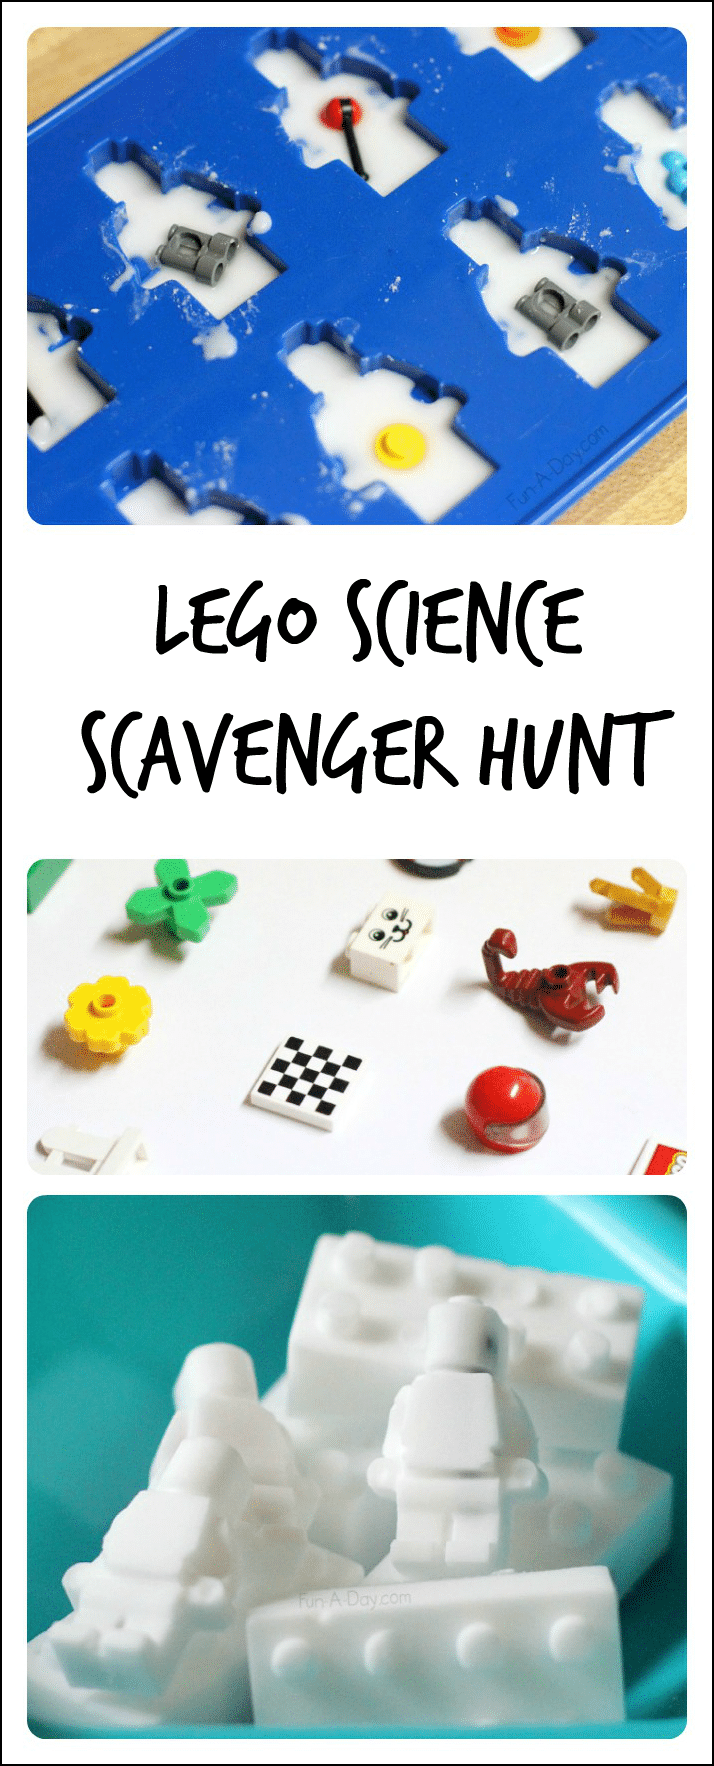 LEGO science scavenger hunt for kids - so much playful learning!